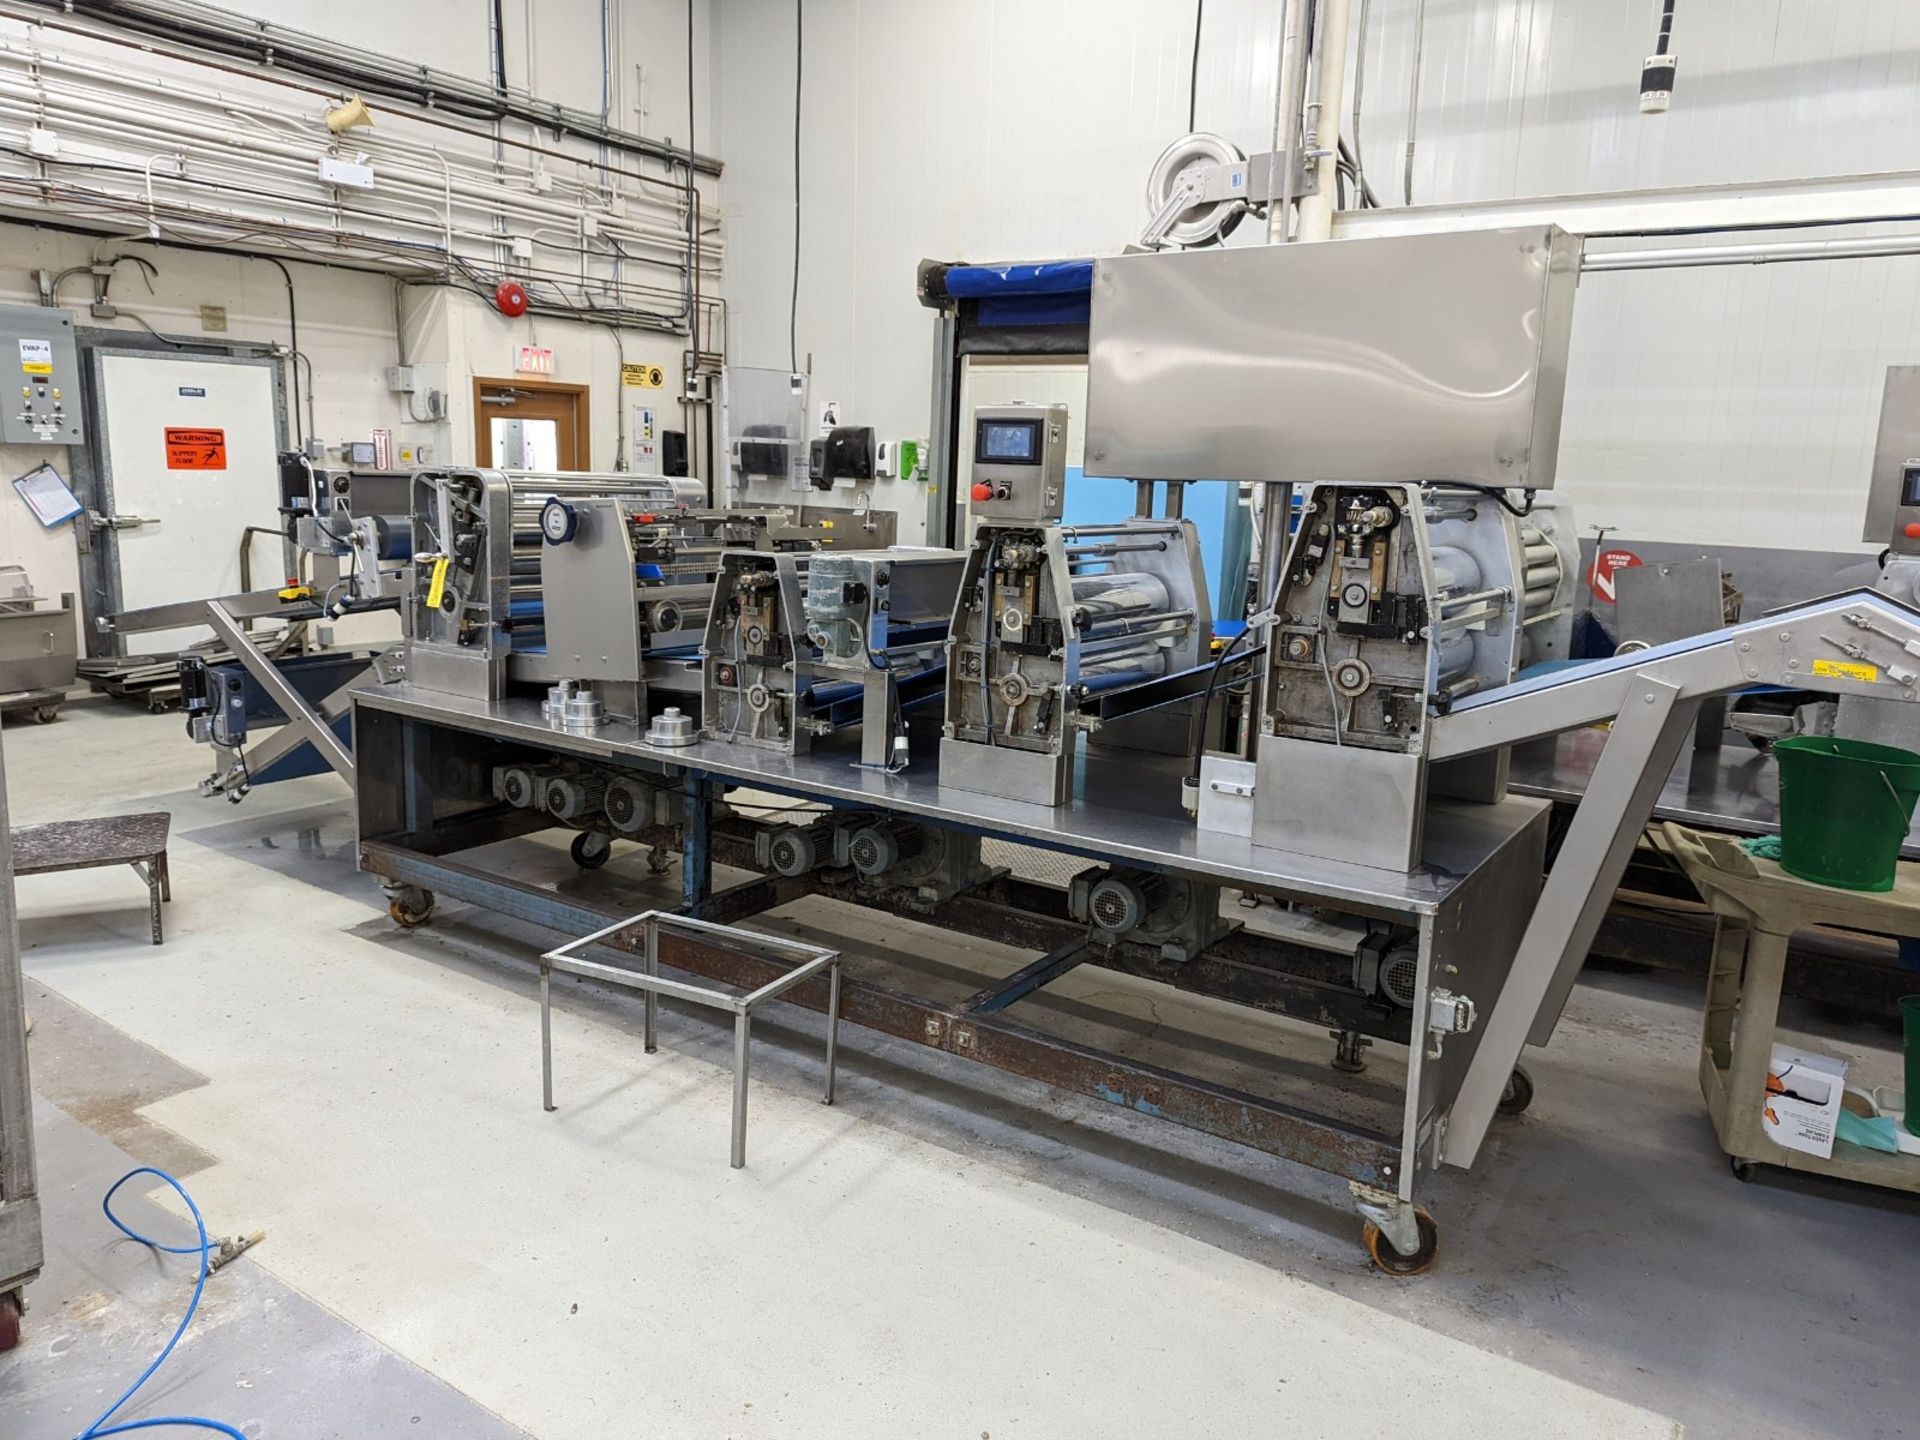 Full Croissant Laminating Line, 4 Production Sections with 4 tooling carts